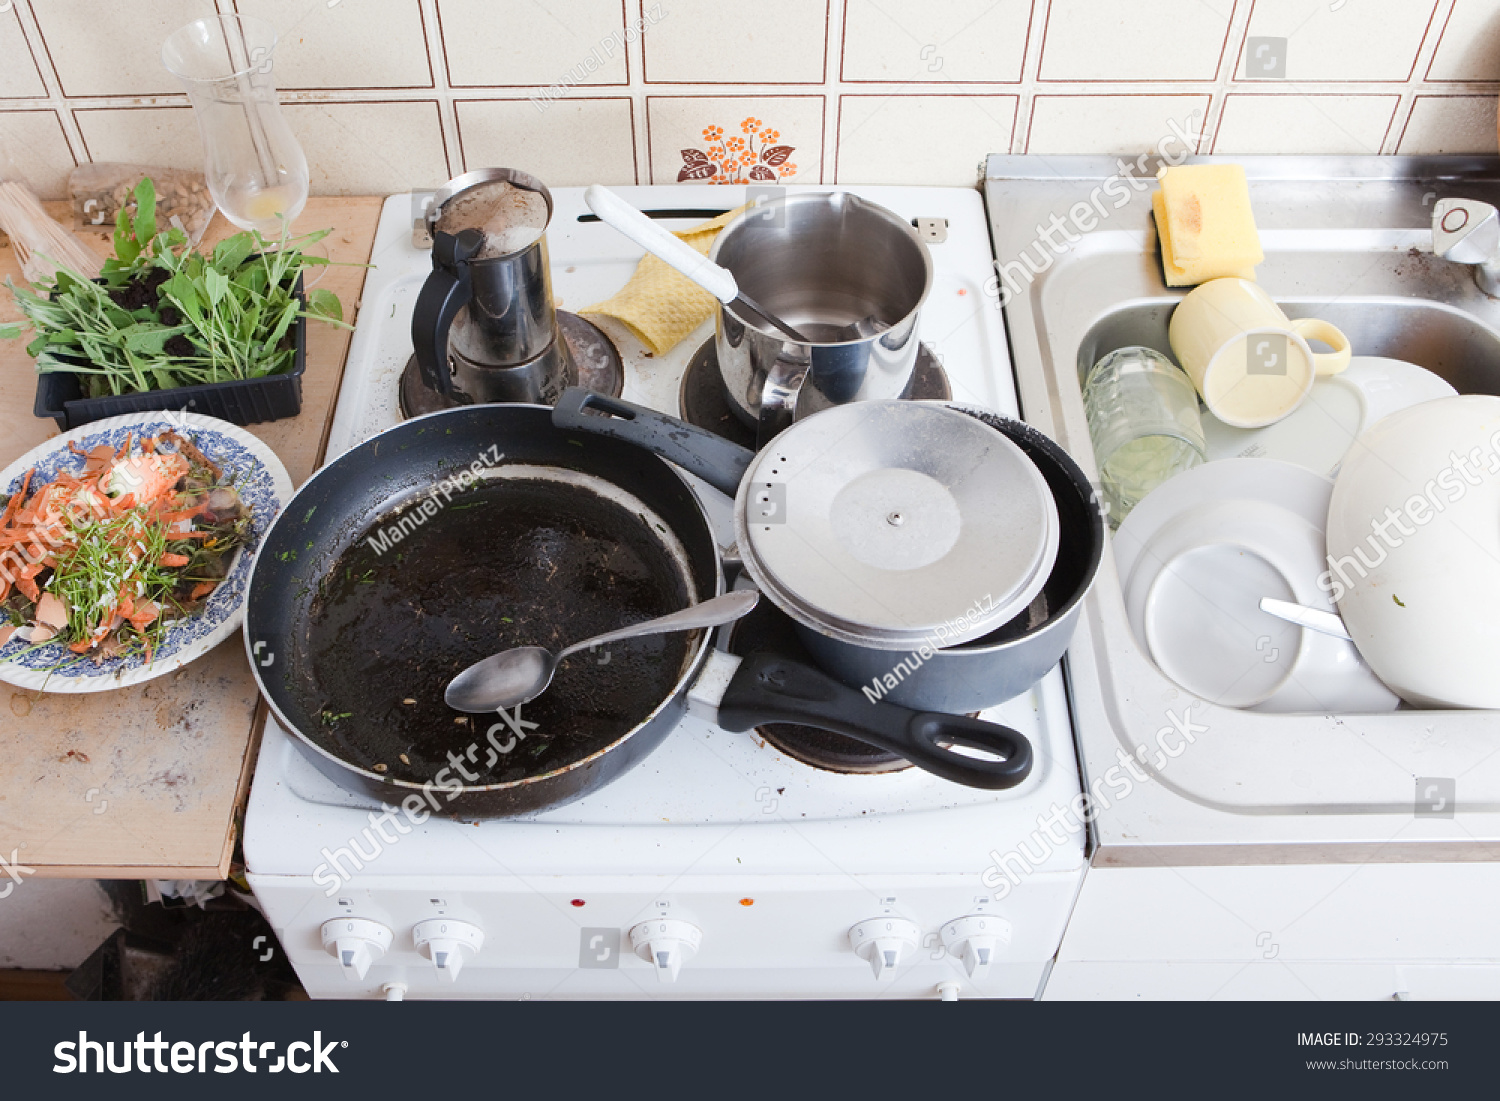 Messy Kitchen Domestic Household Dirty Pan Stock Photo 293324975 ...